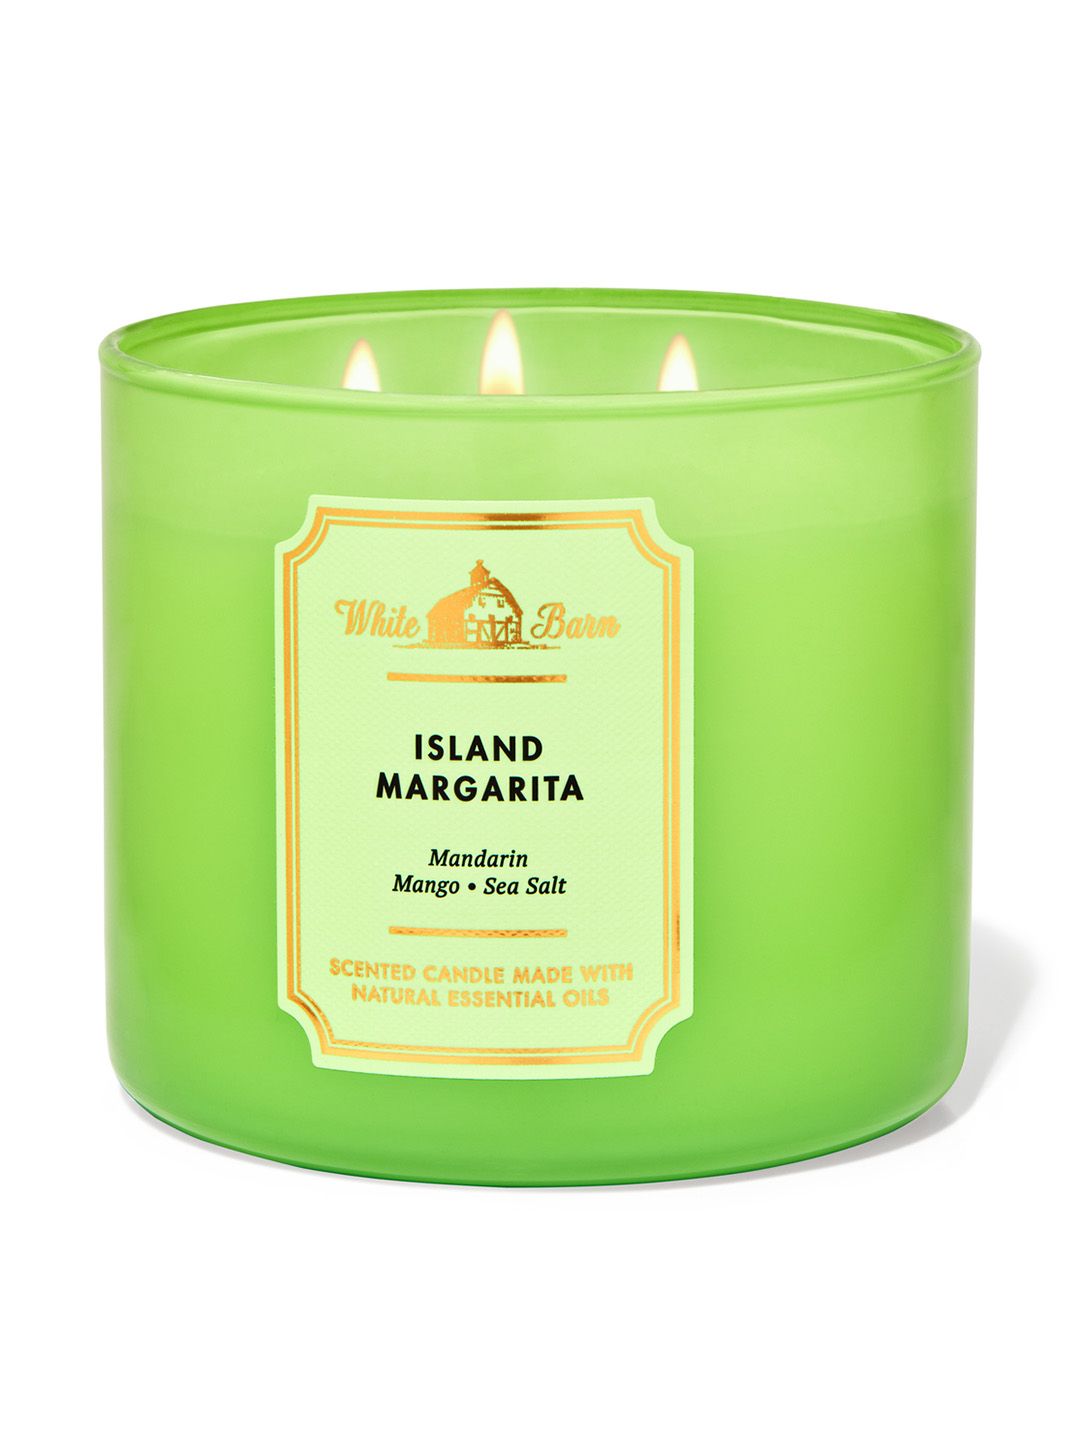 Bath & Body Works Island Margarita 3-Wick Scented Candle - 411 g Price in India